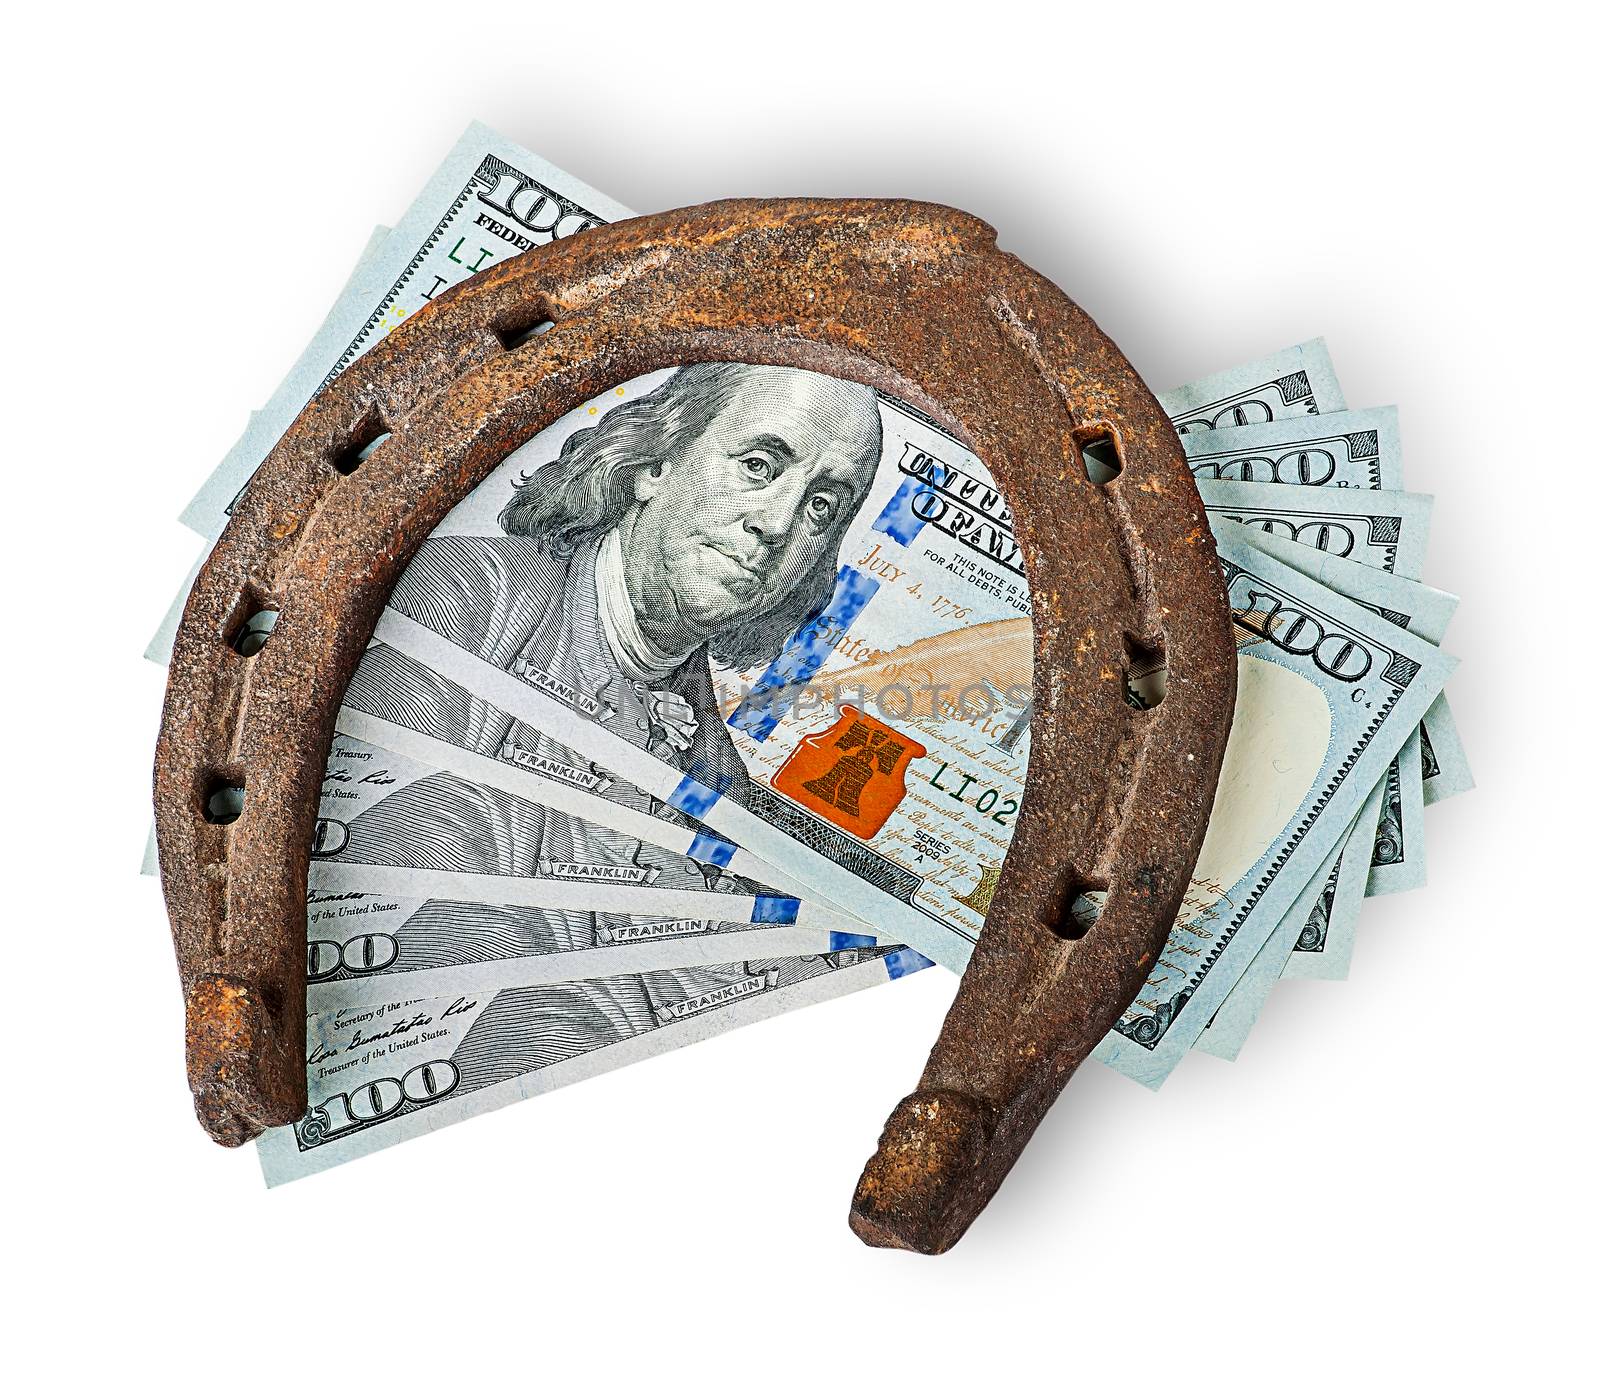 Old rusty horseshoe and money by Cipariss